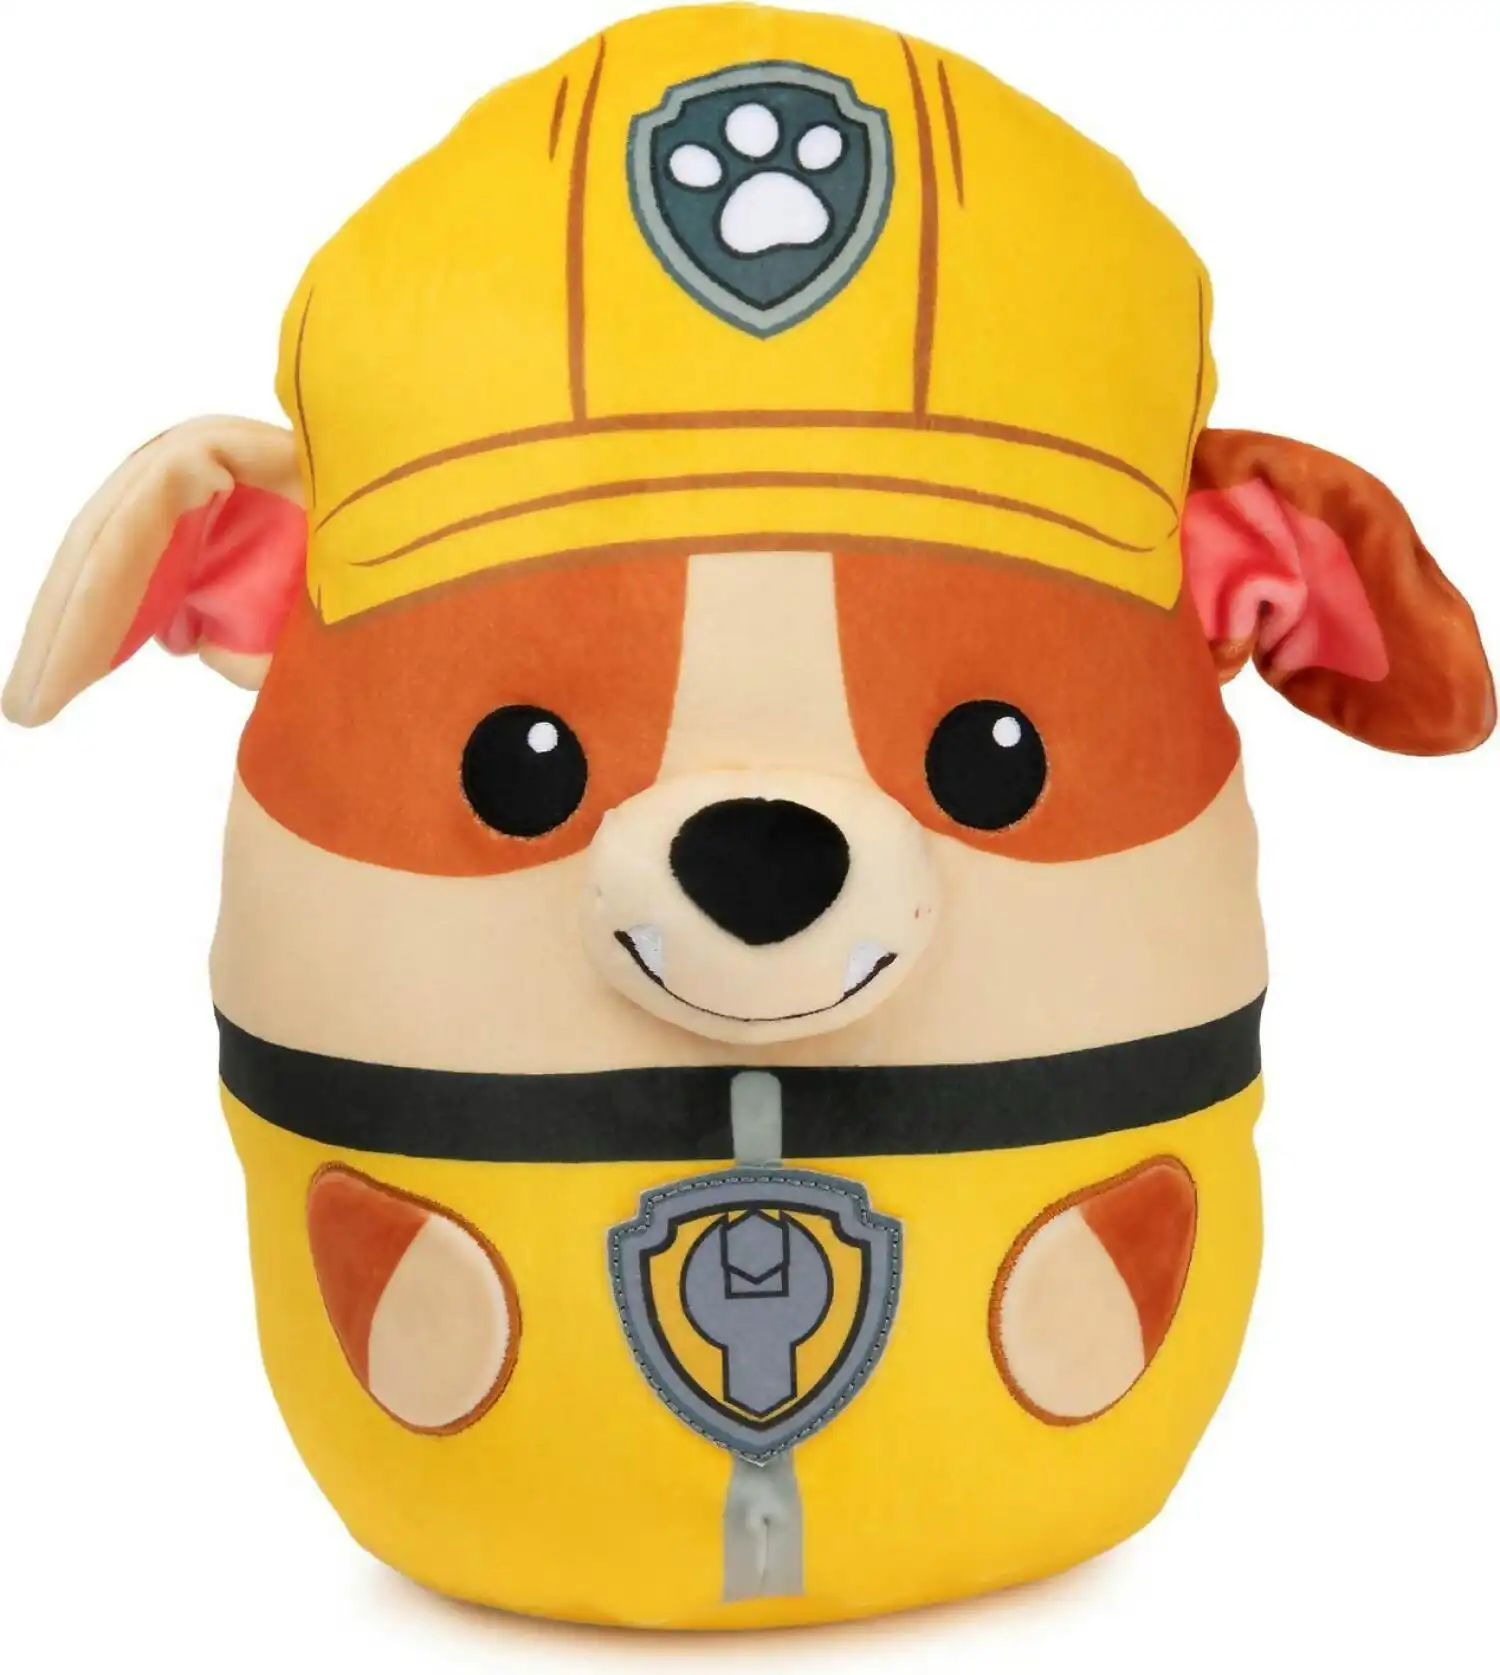 Paw Patrol - Squishie Plush - Rubble 12 Inch - Spin Master